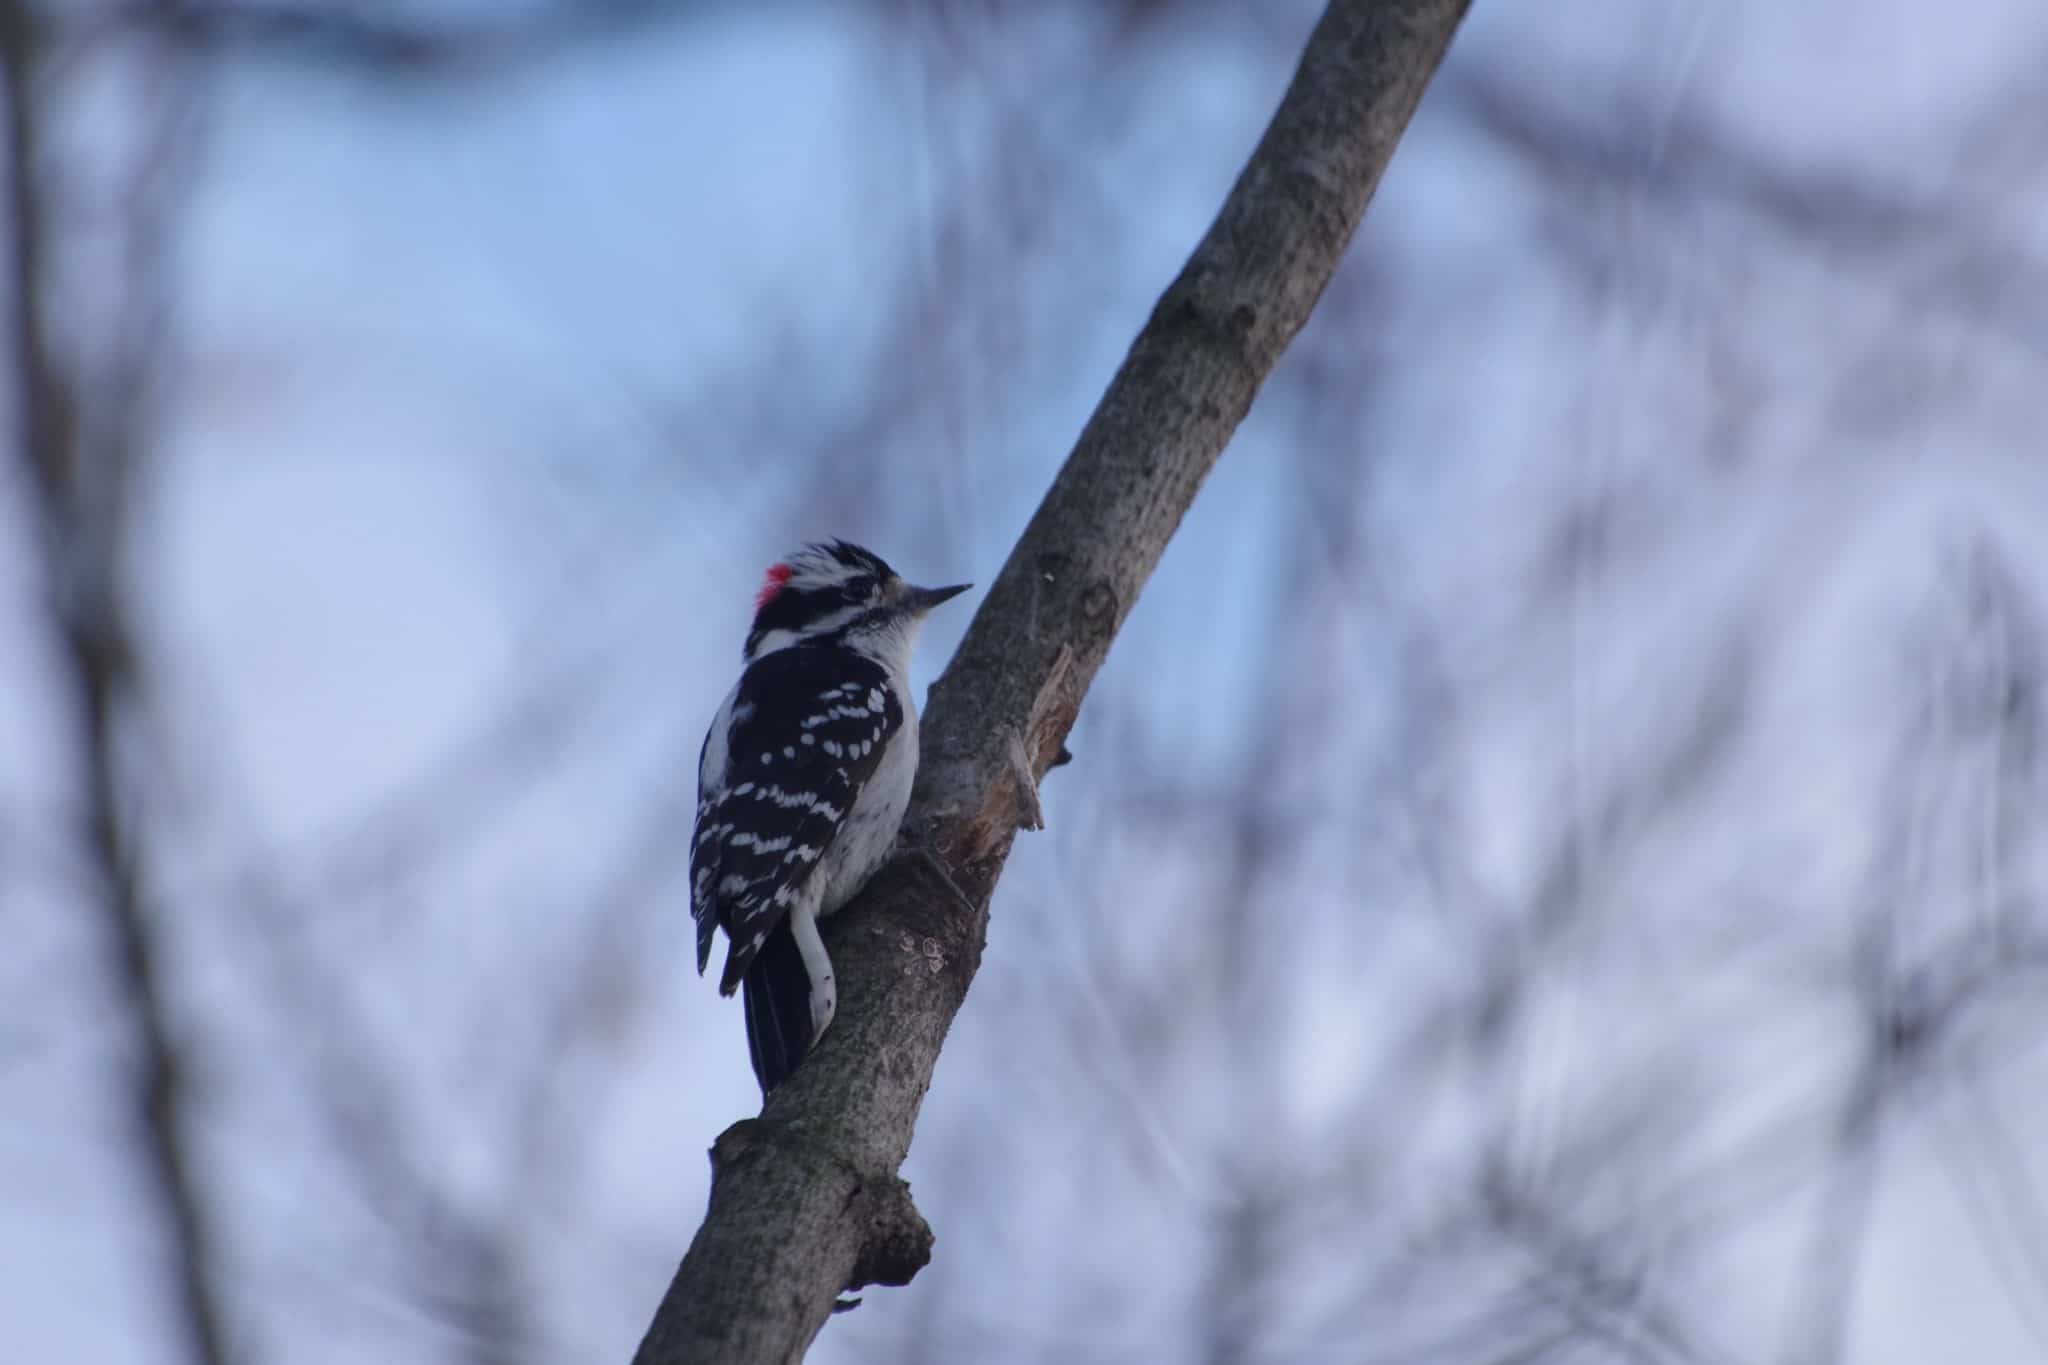 Downy woodpecker on a branch